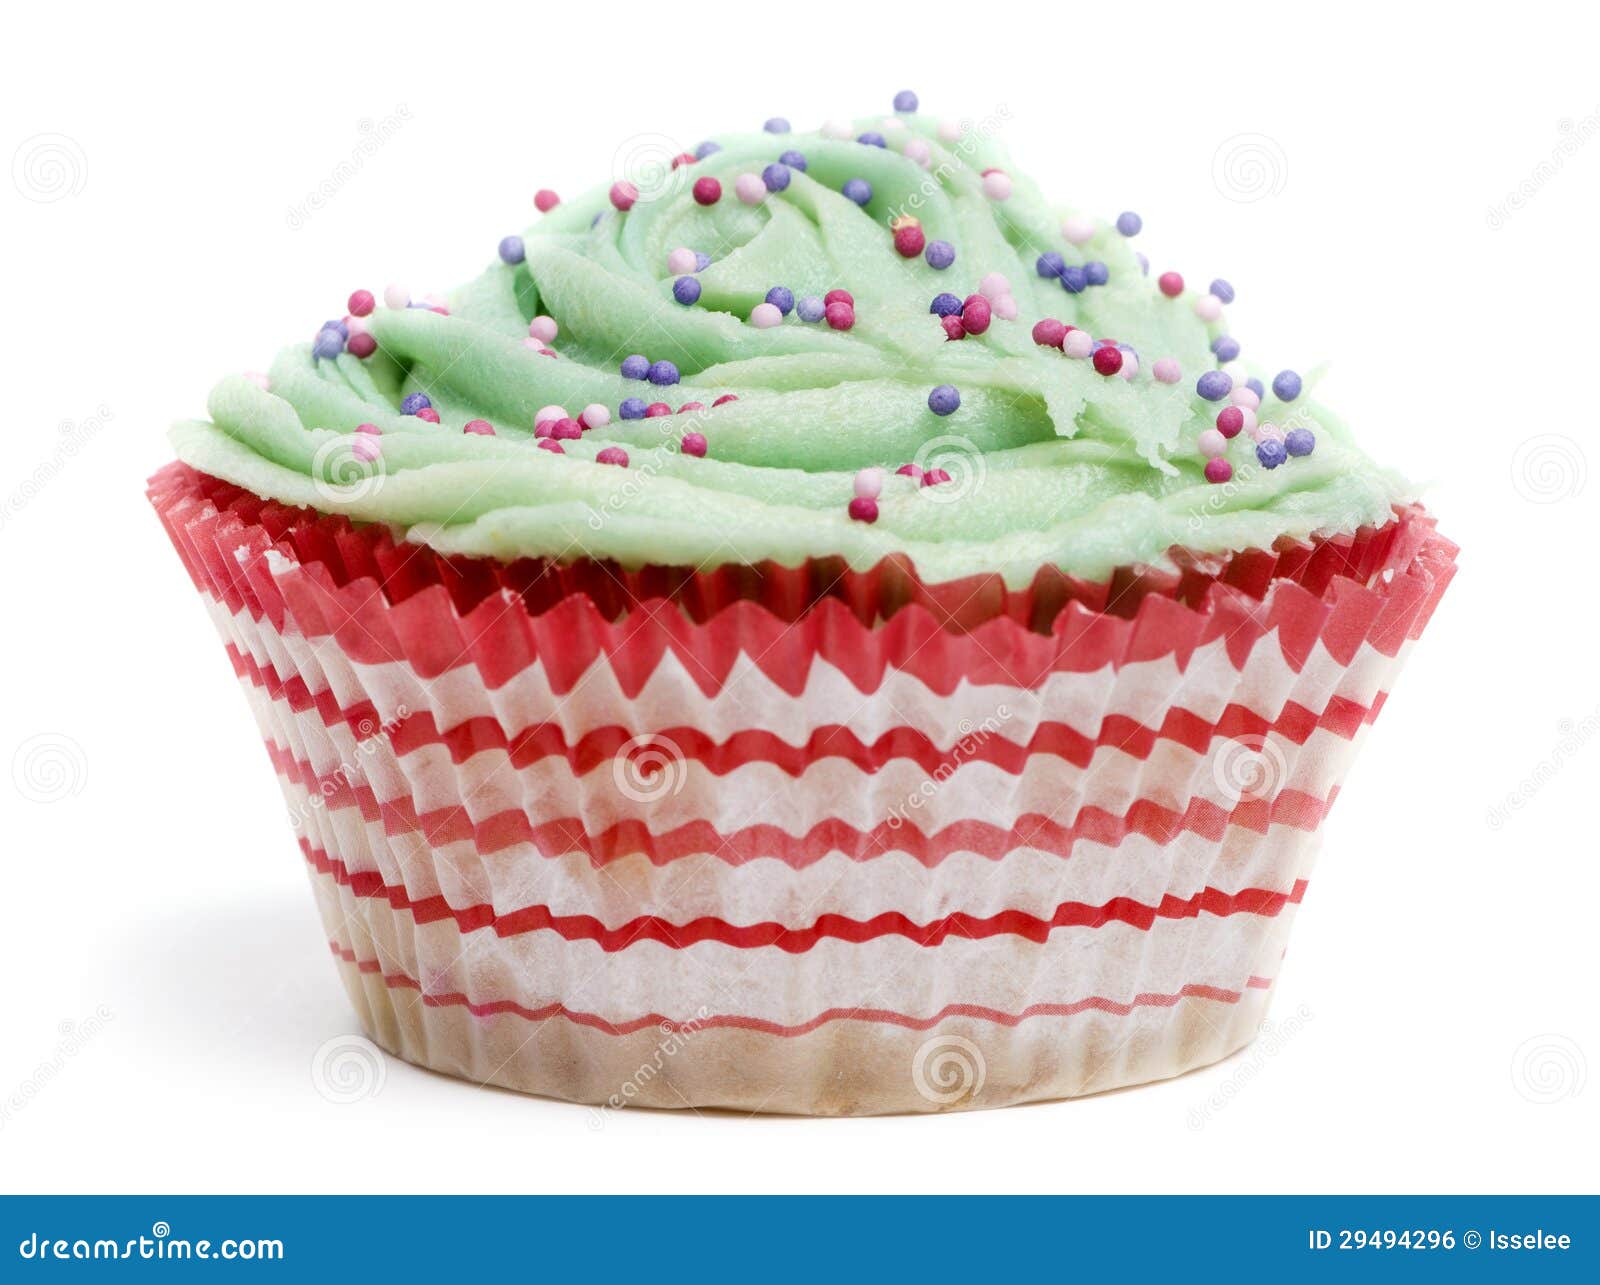 cupcake with green icing and hundreds and thousands against white background